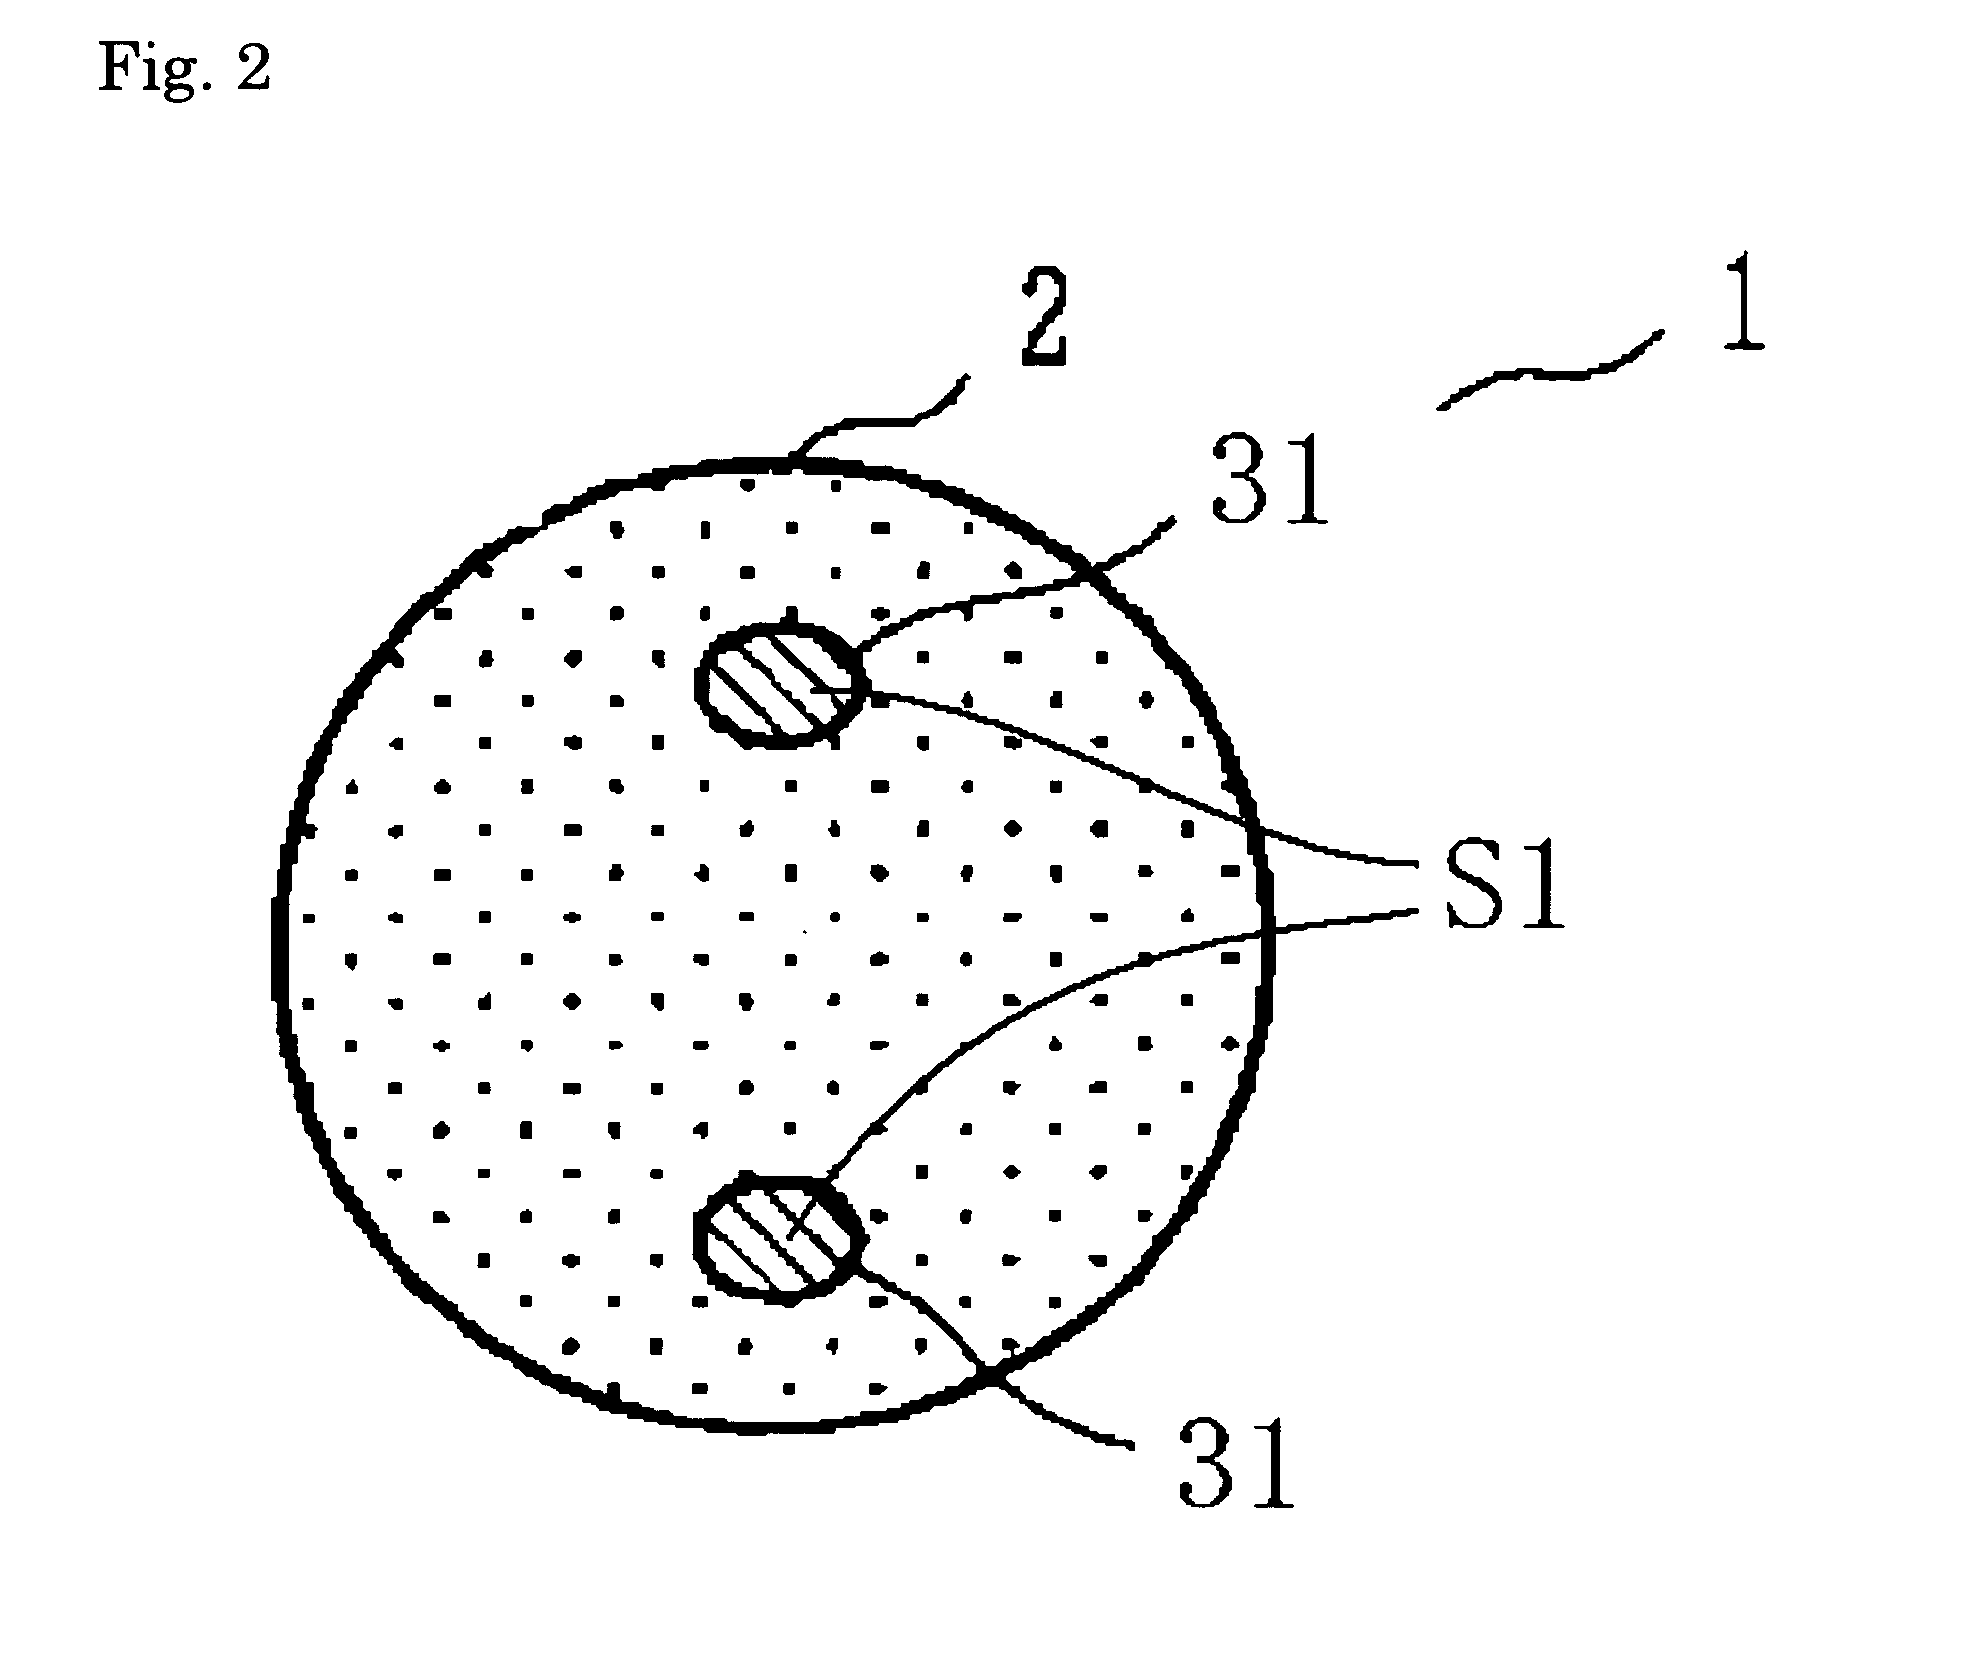 Ceramic Heater, Method of Producing the Same, and Glow Plug Using a Ceramic Heater